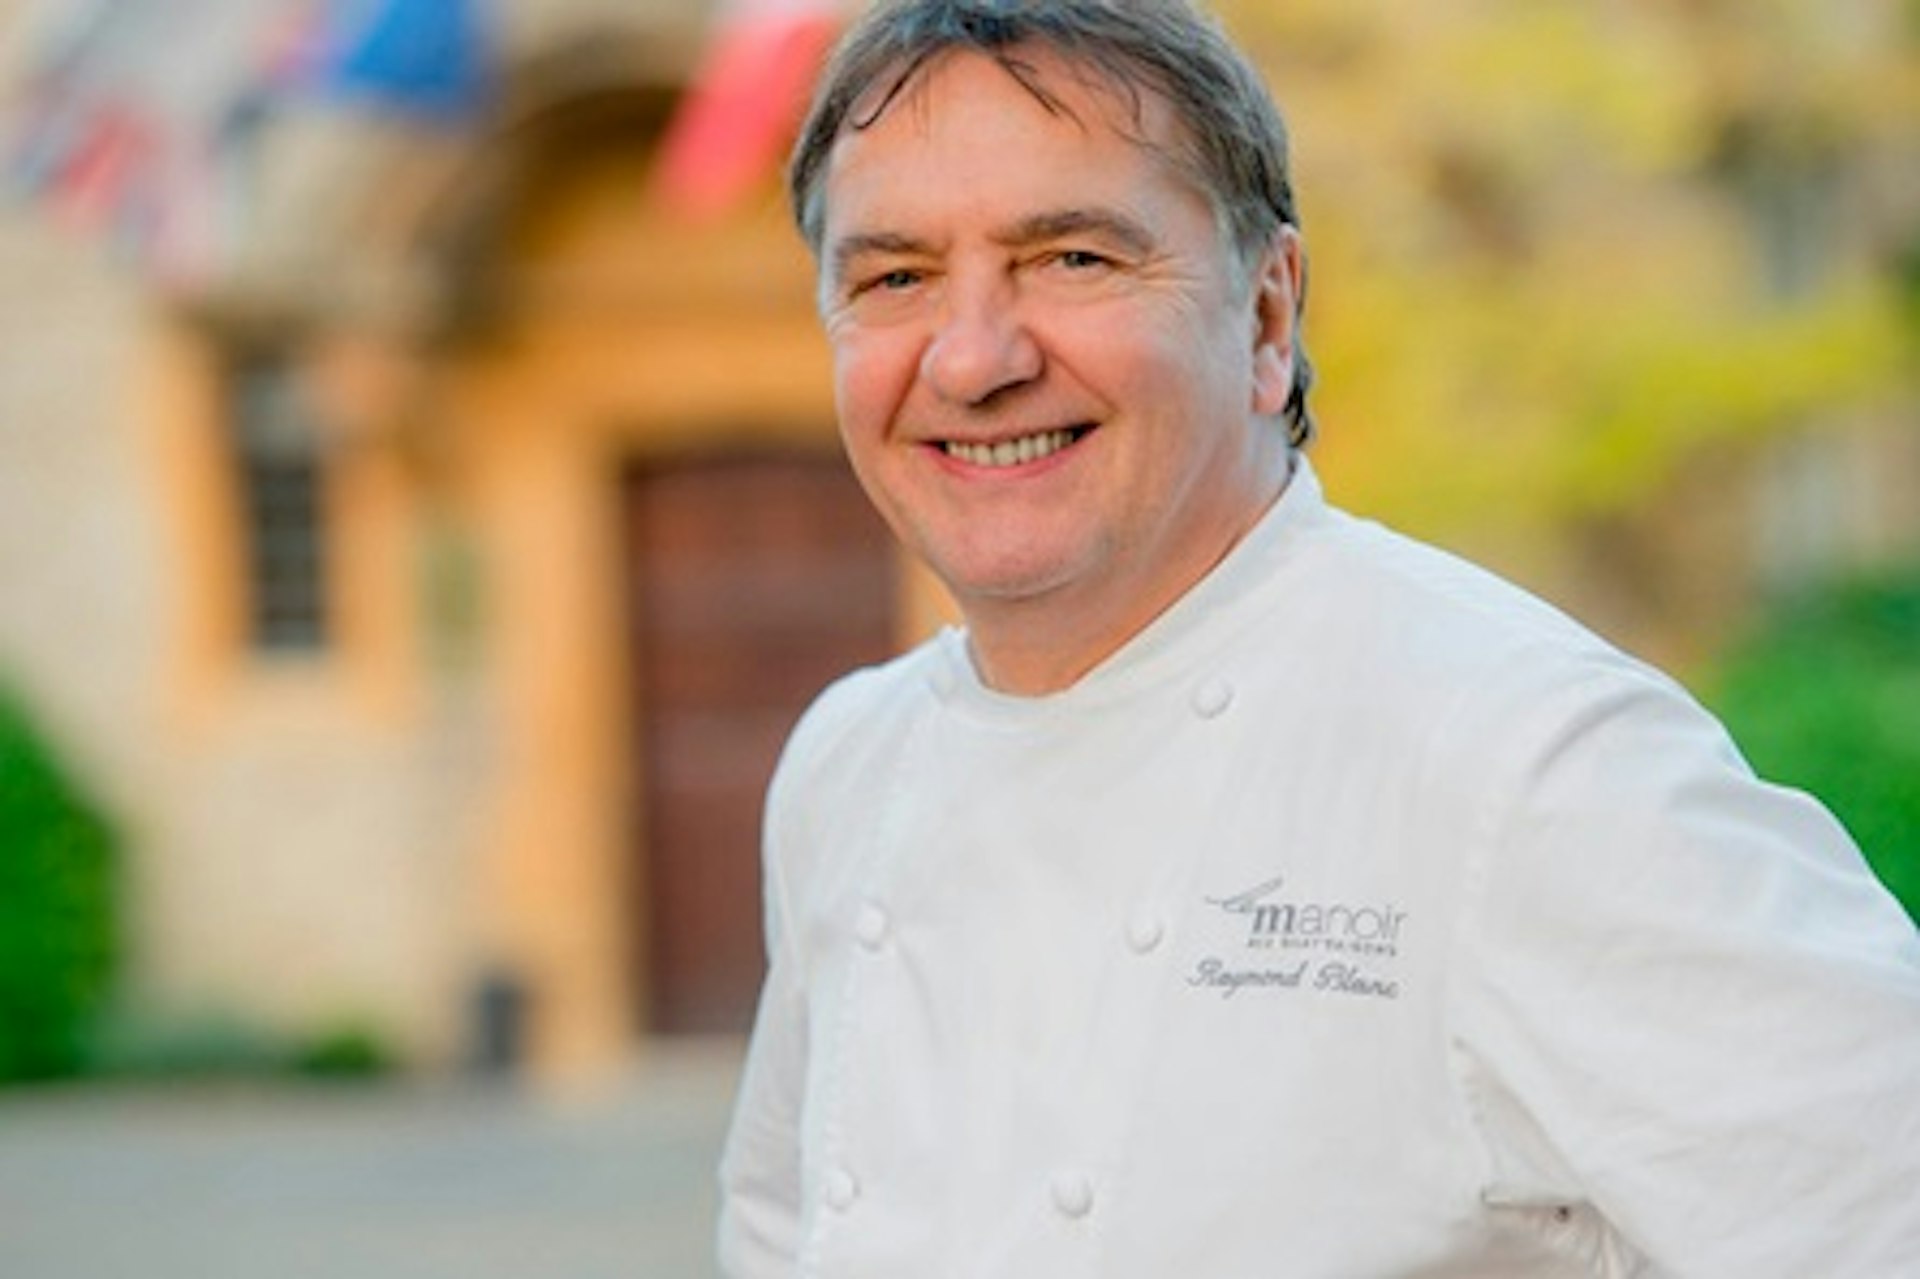 Half Day Course at the Raymond Blanc Cookery School at Belmond Le Manoir 2